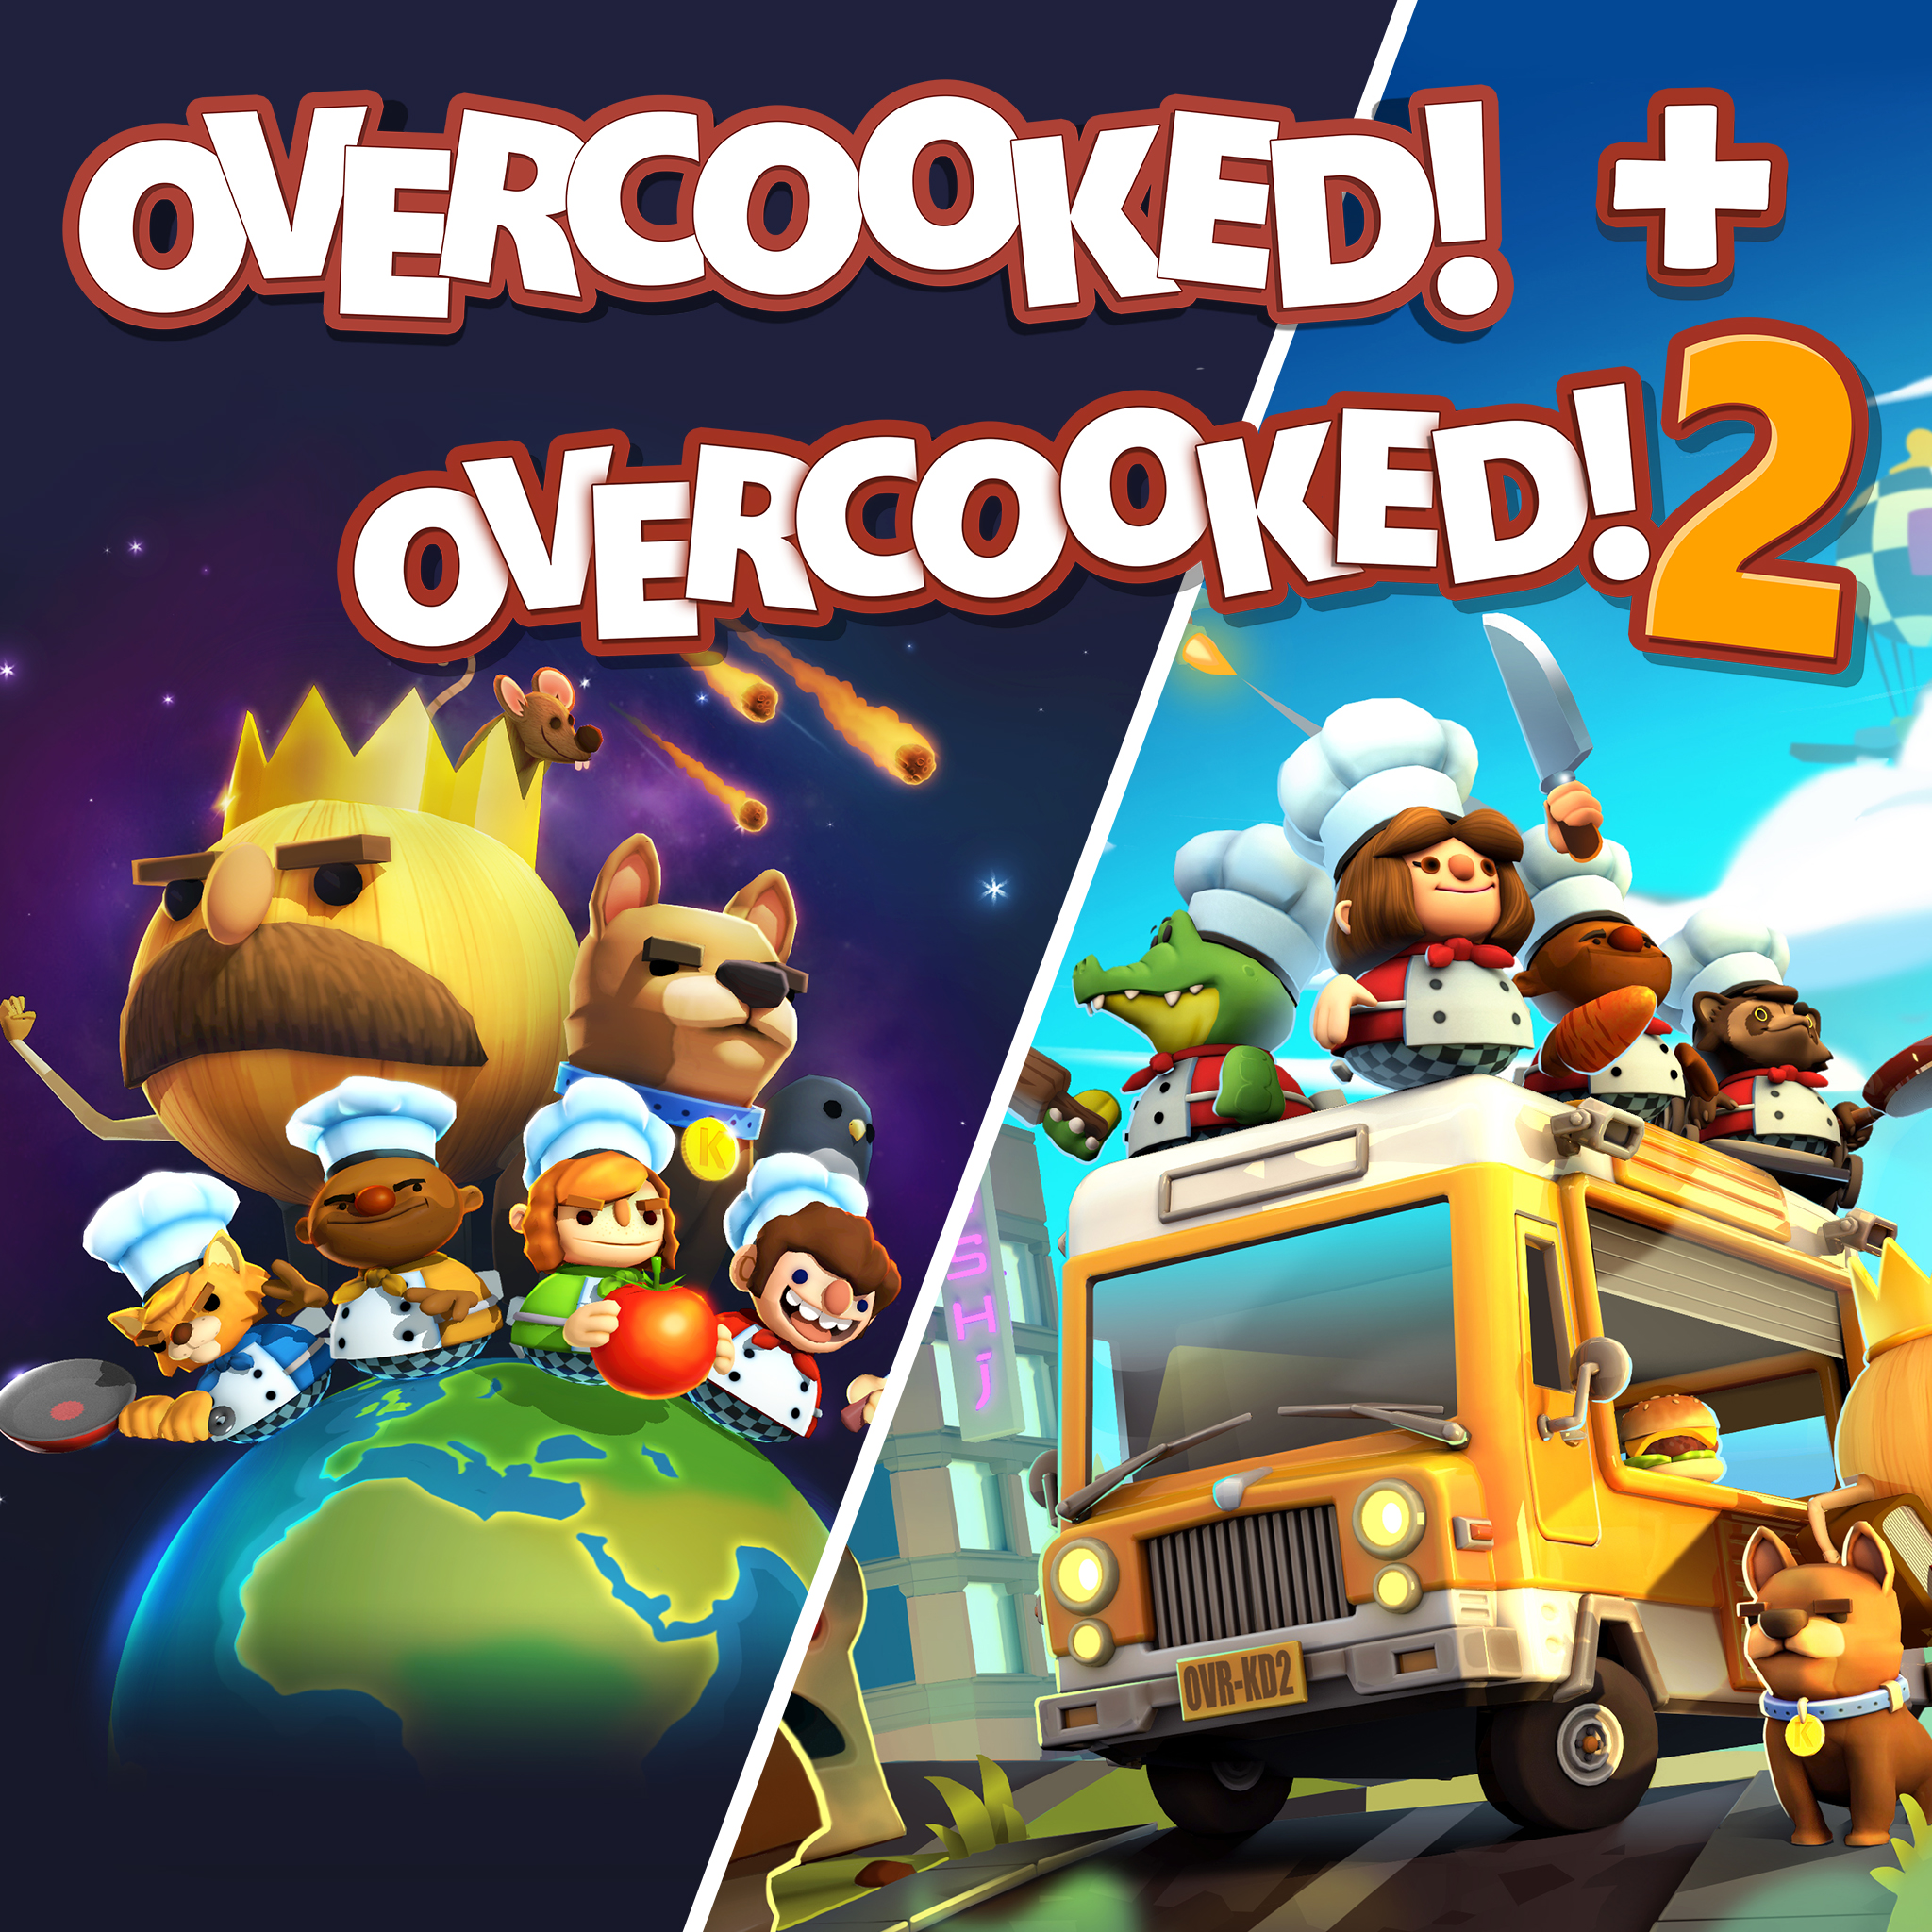 Overcooked! + Overcooked! 2 PS4 Price & Sale History | PS Store USA